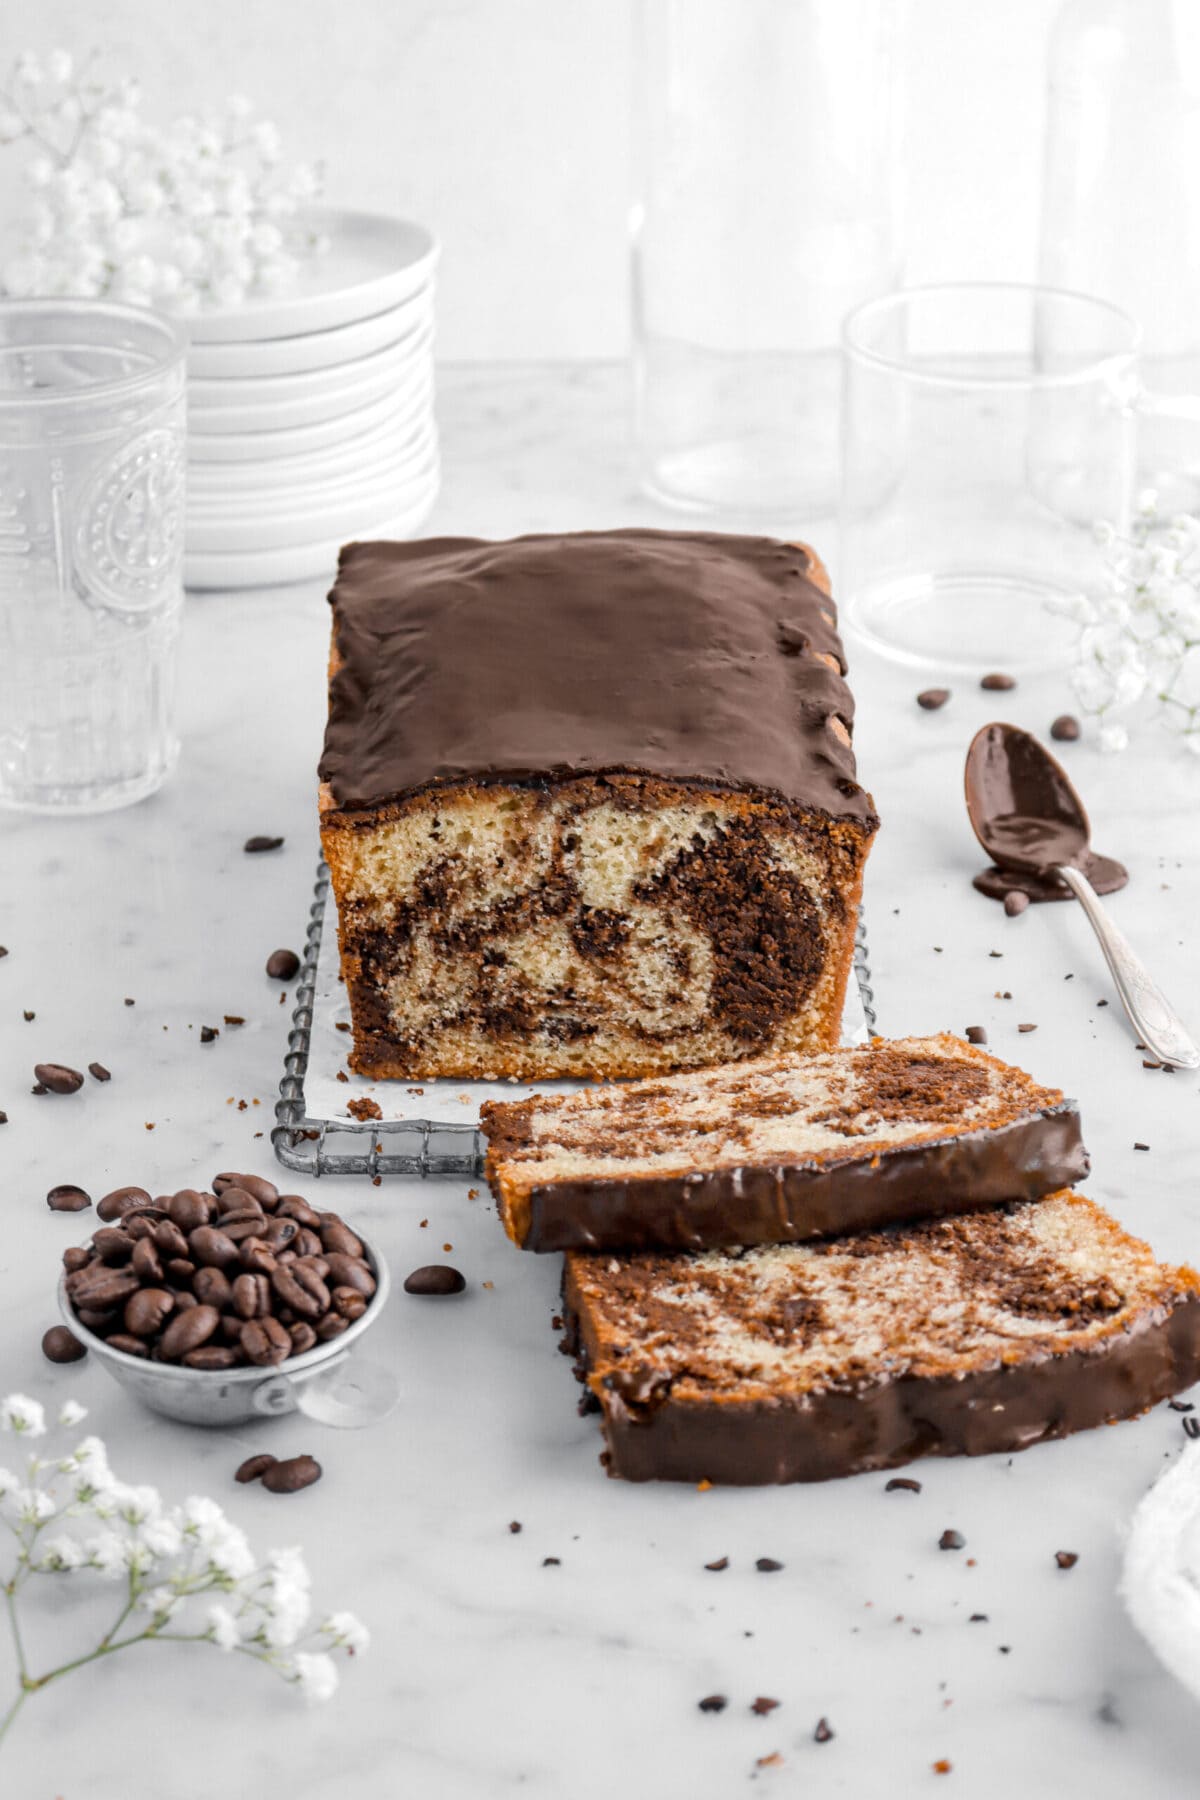 angled shot of chocolate marble loaf cake with two slices laying in front with coffee beans and white flowers around, a spoon of chocolate icing beside, and stack of plates behind.